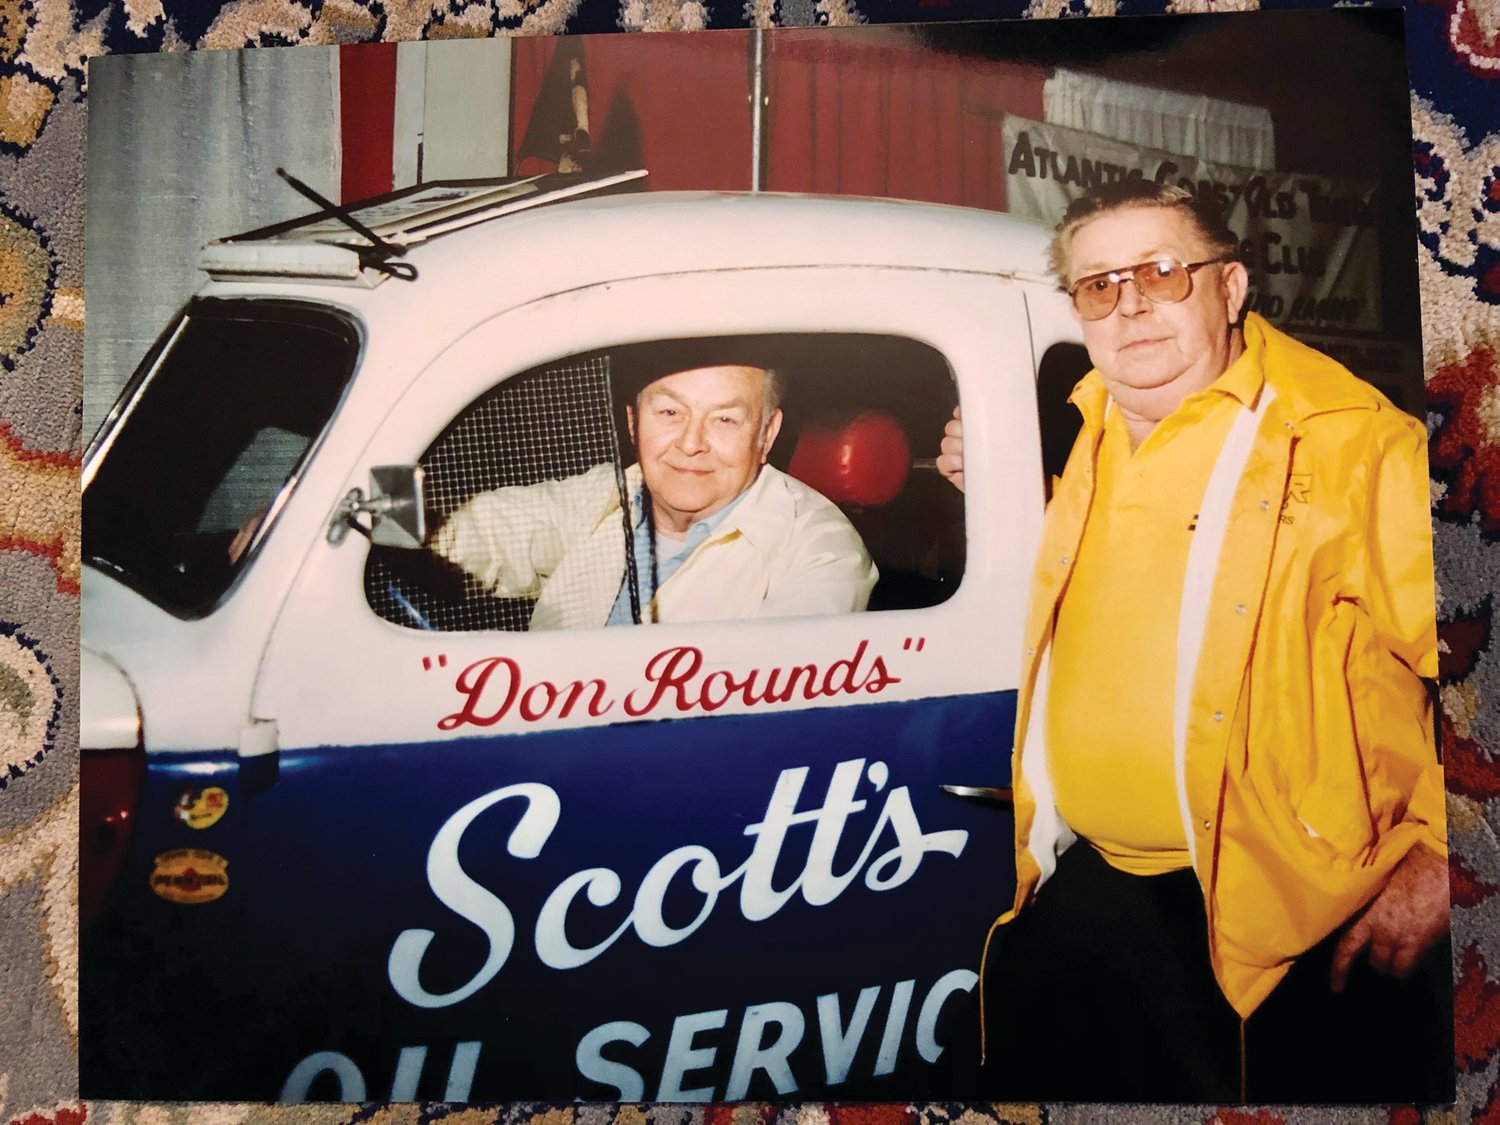 Recalling those glory days, Don Rounds revisited his old race car with his brother and fellow mechanic, Harold Rounds, at “Race-A-Rama” in Springfield, Massachusetts.